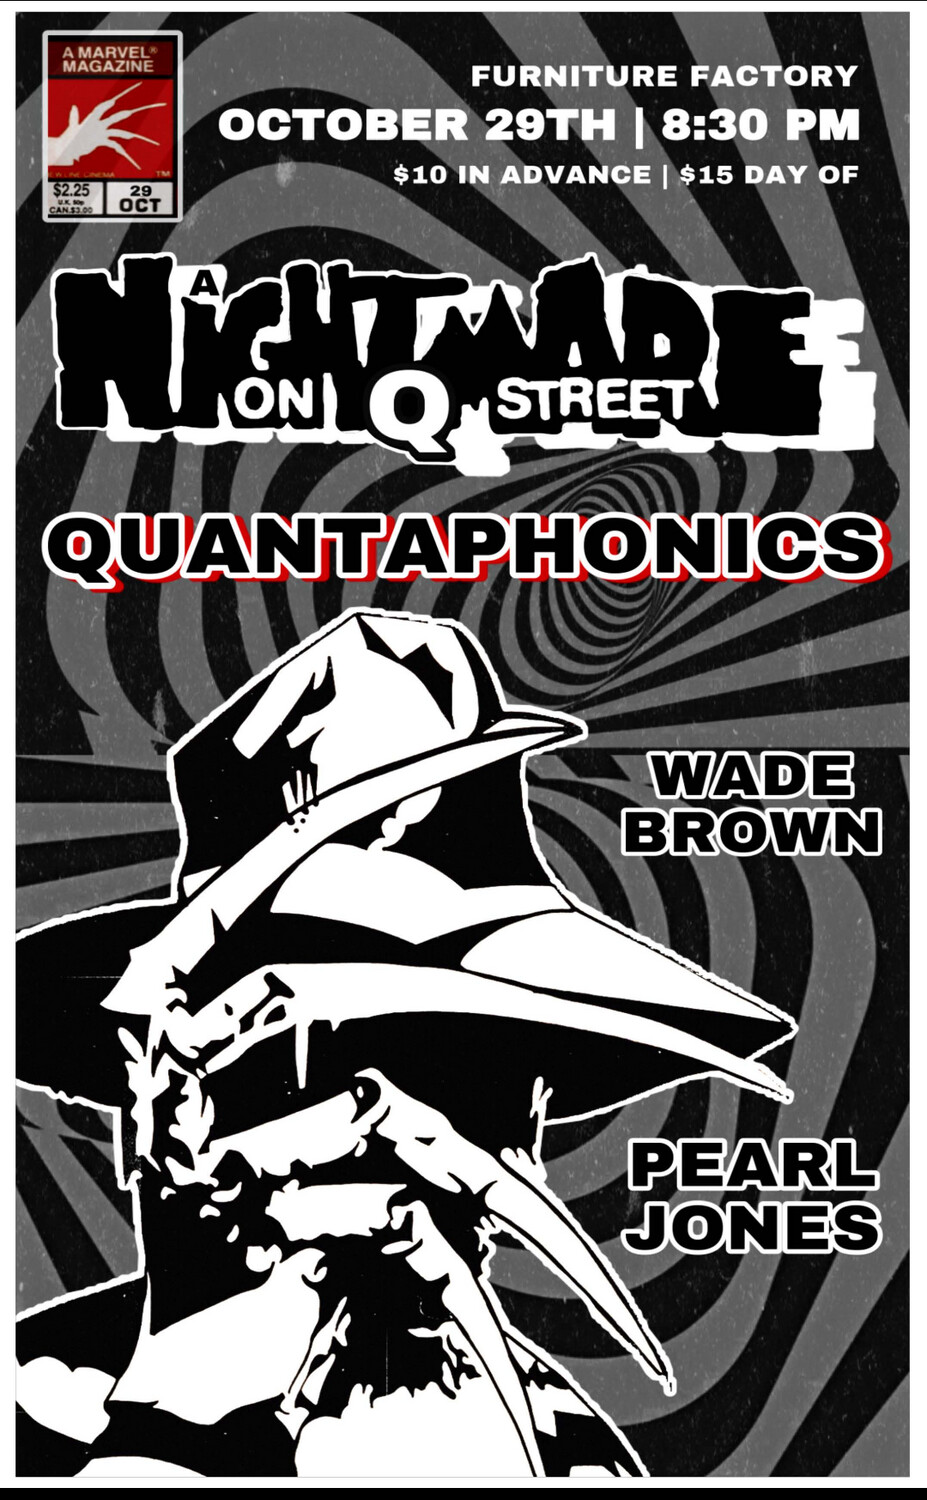 Quantaphonics Live - Table for 4 plus tickets. (TABLE MUST BE CLAIMED BY 8PM)